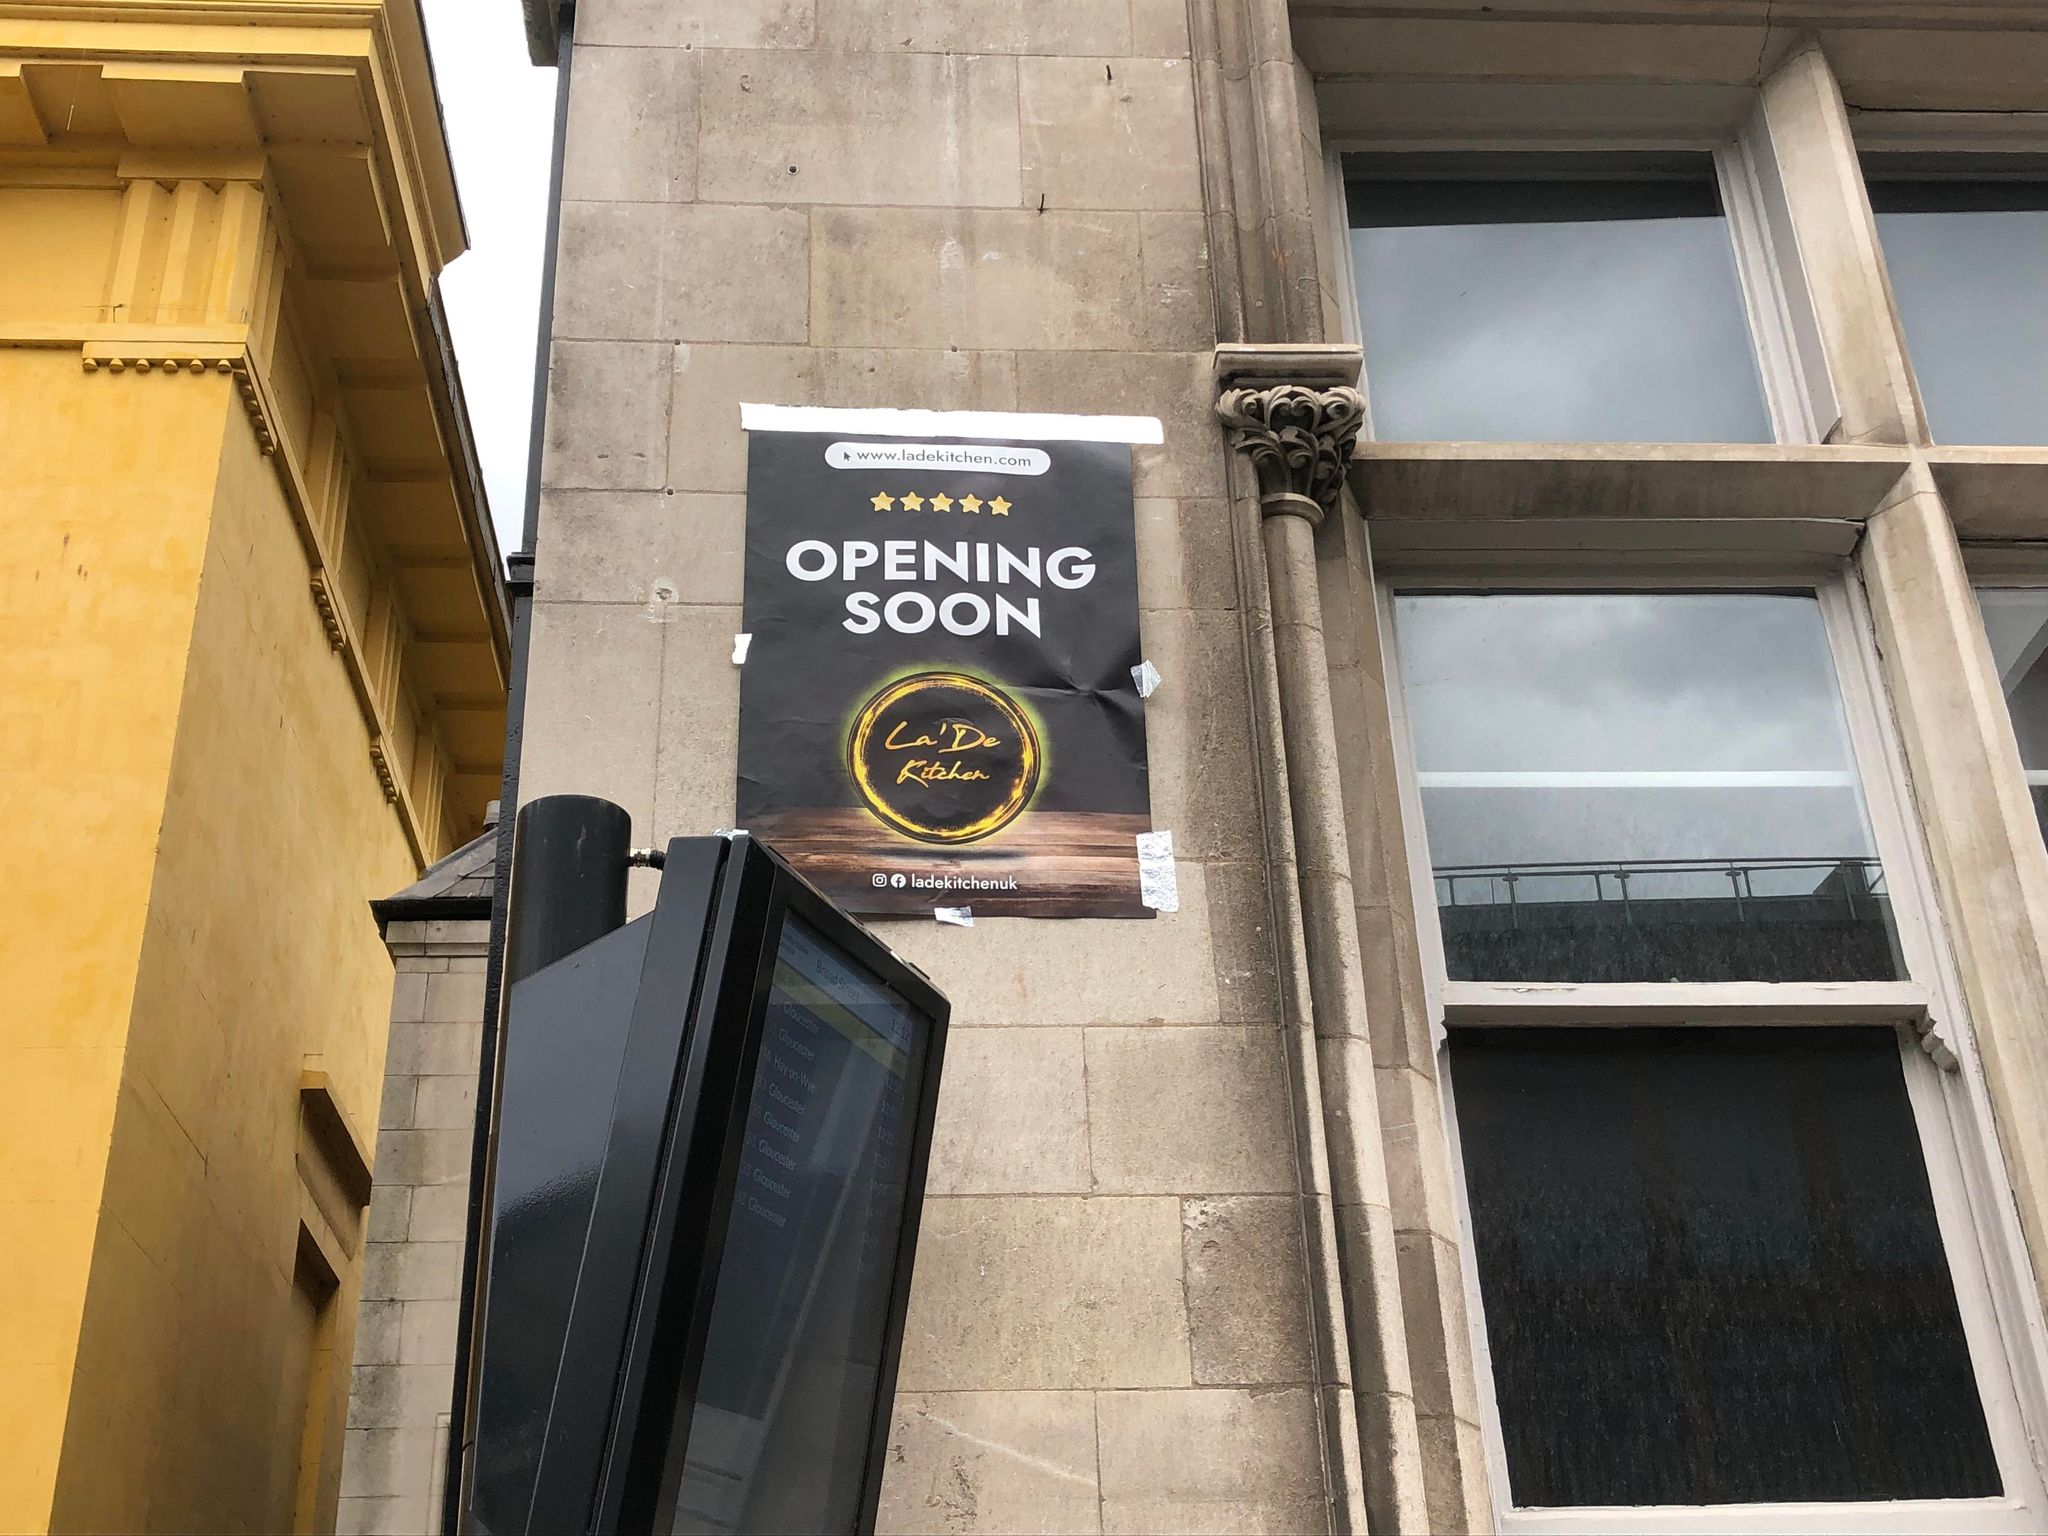 NEWS | A new restaurant will soon be opening in Hereford city centre